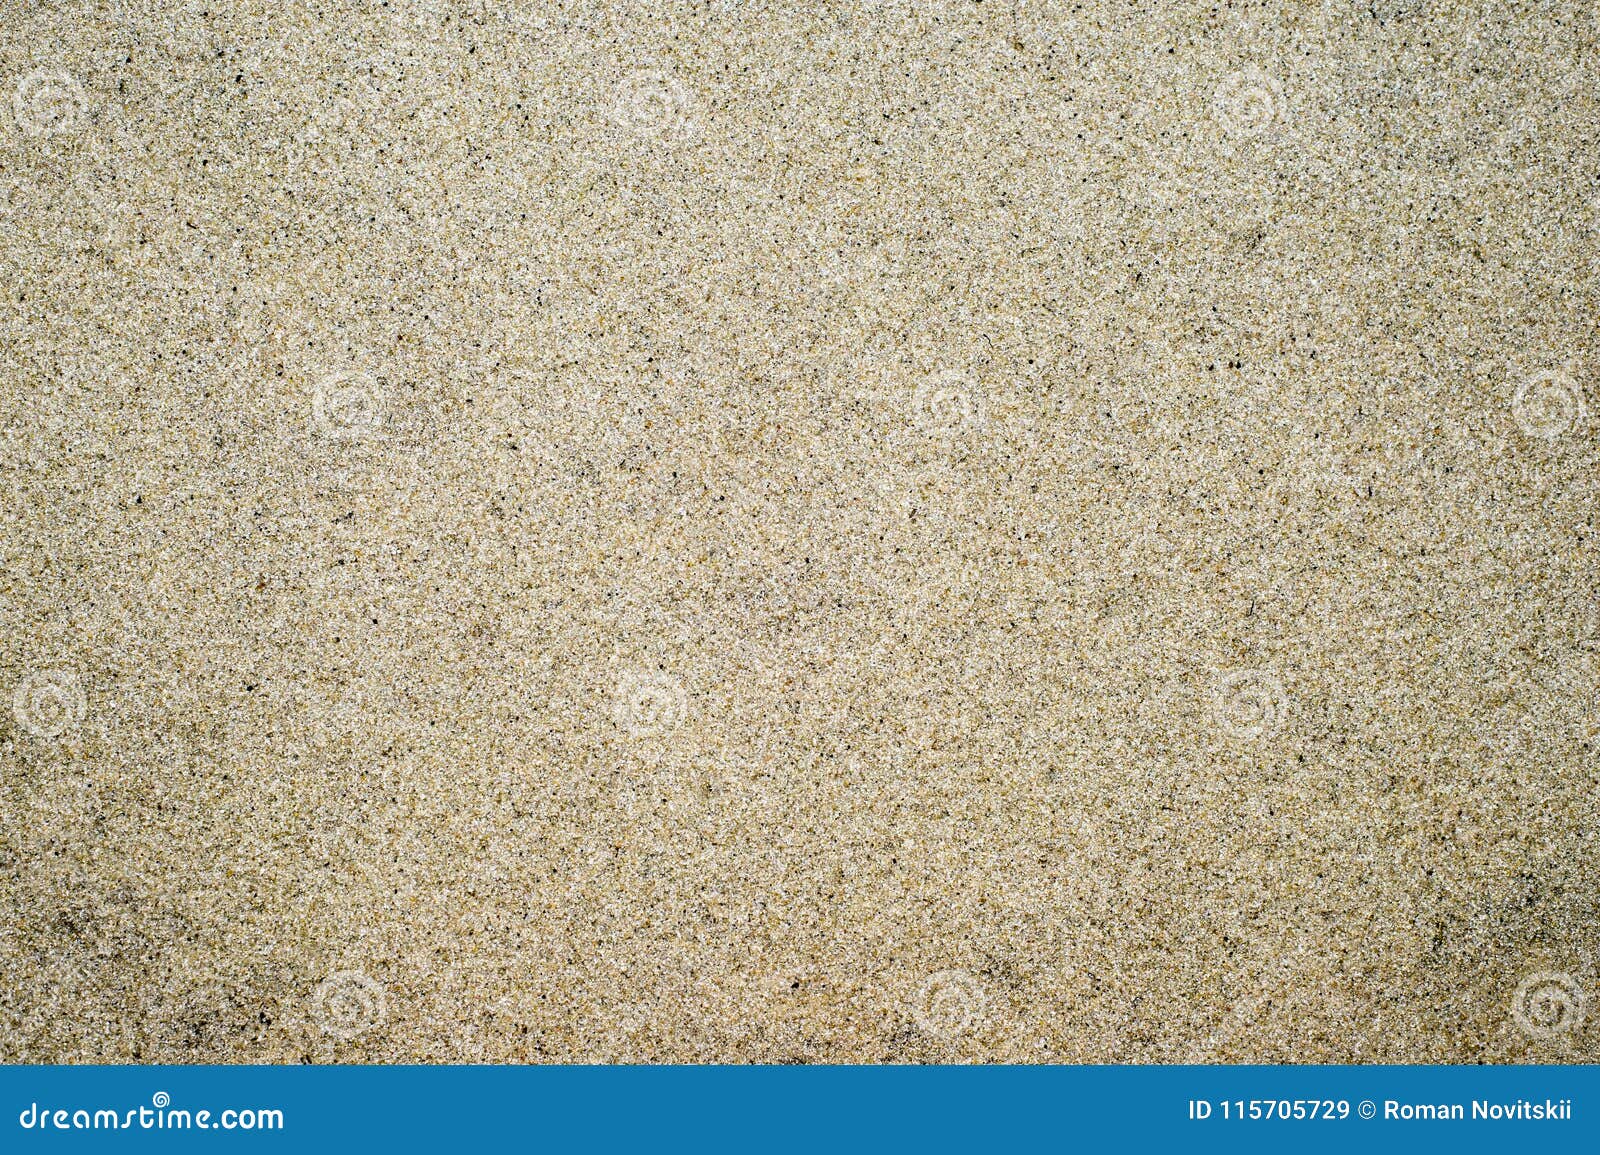 Textured Smooth Surface of Sand. Background. Black and White Image ...